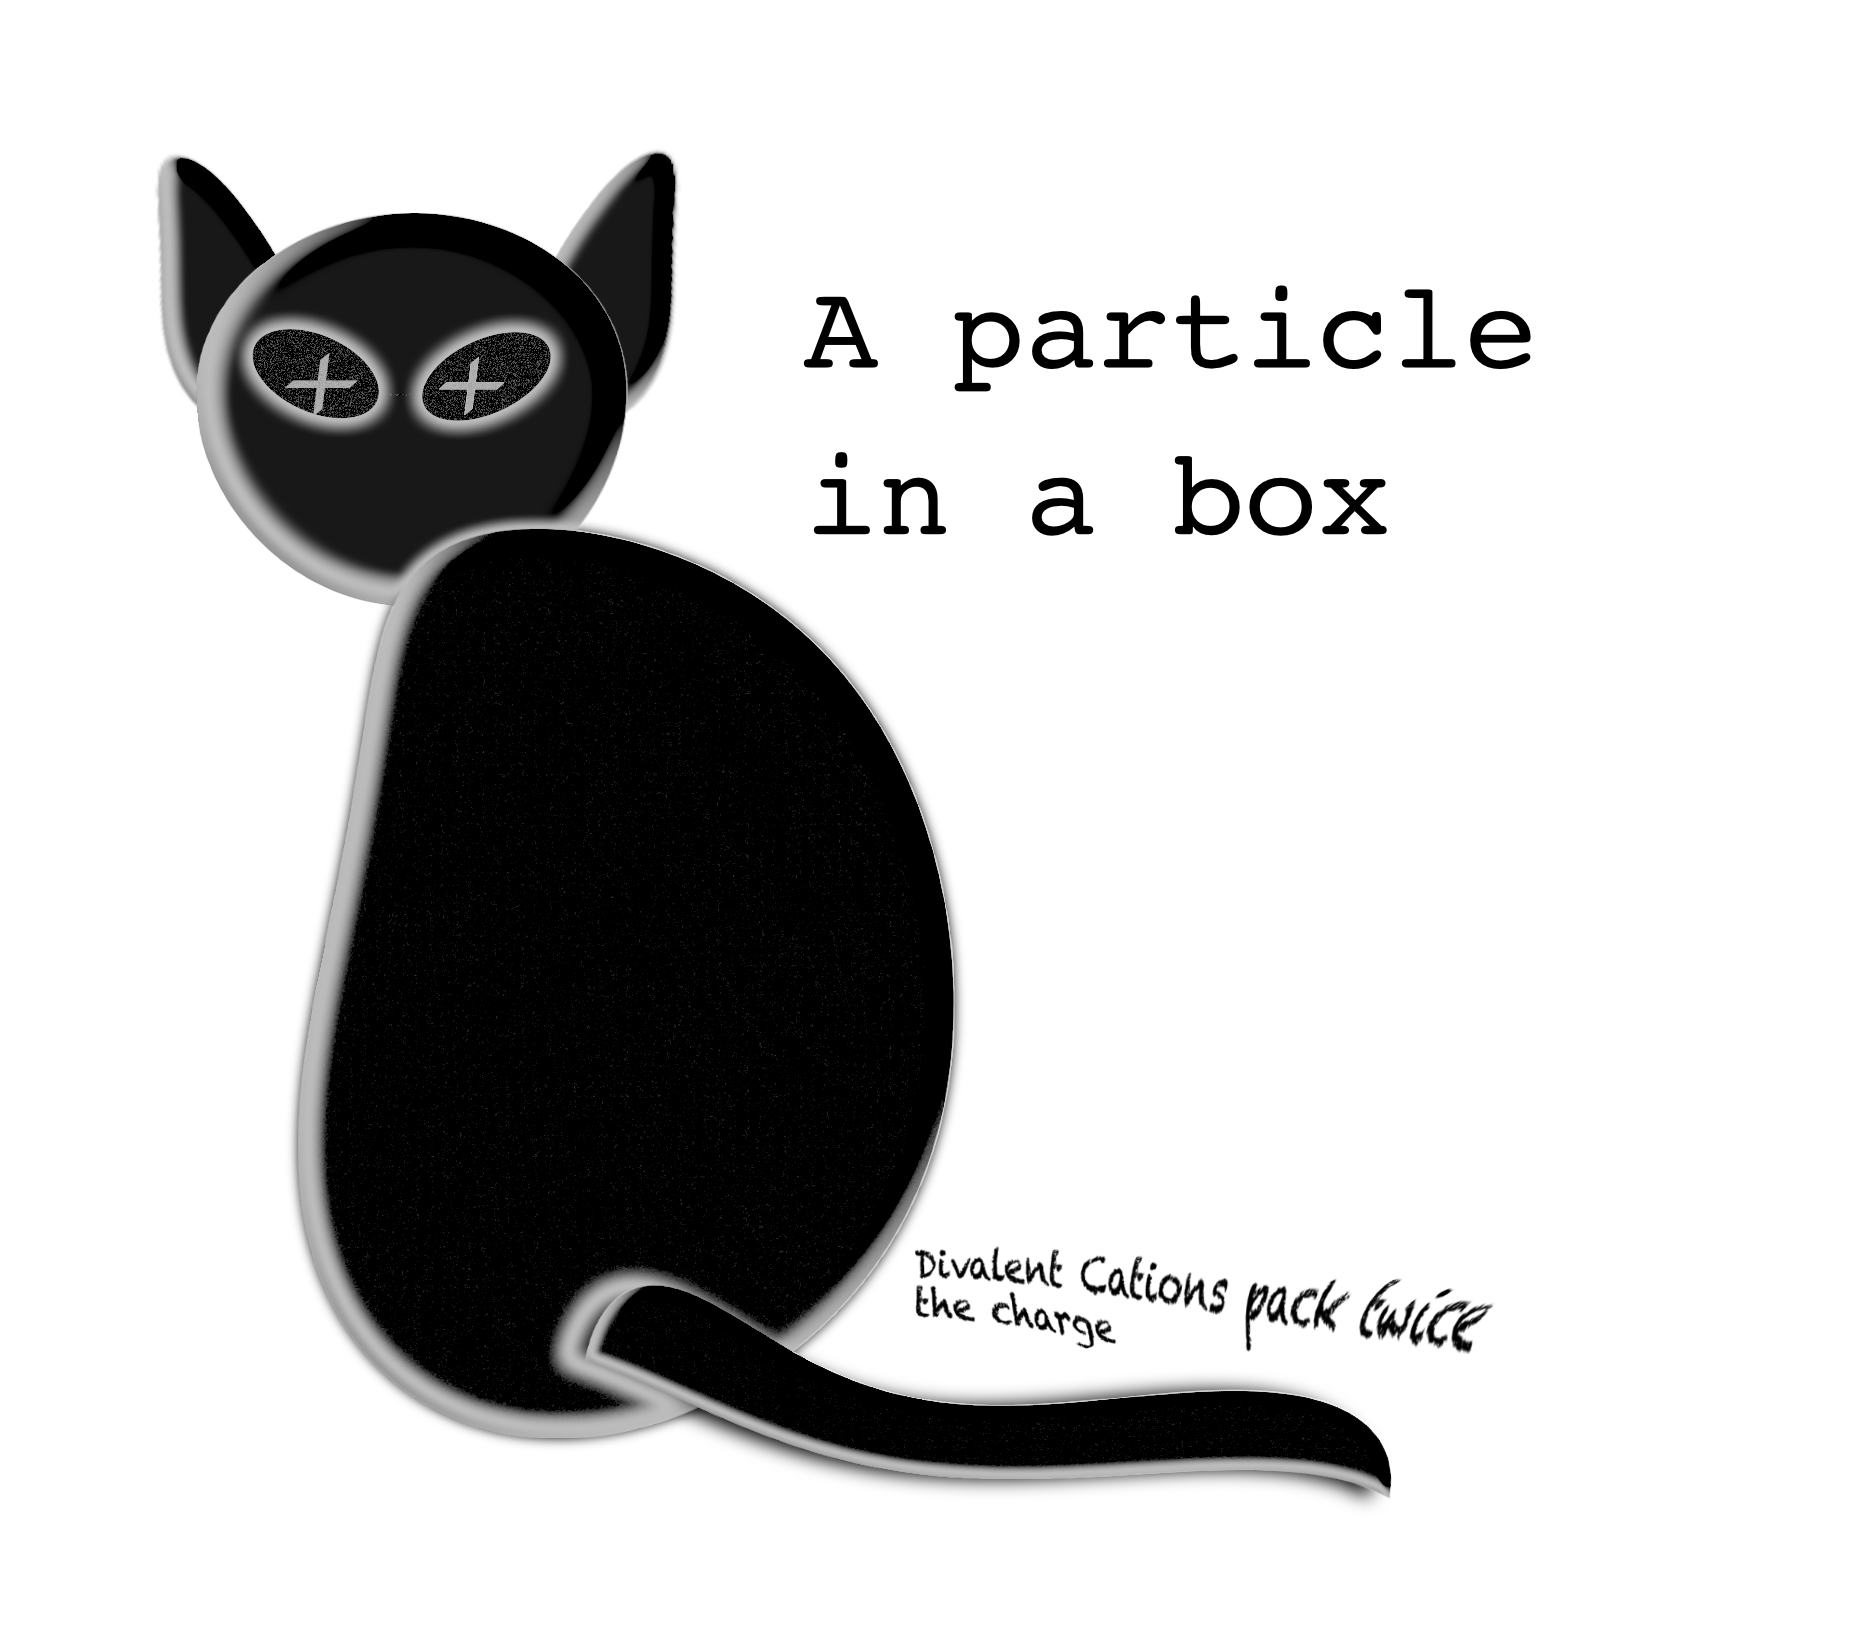 Particle in a box_body